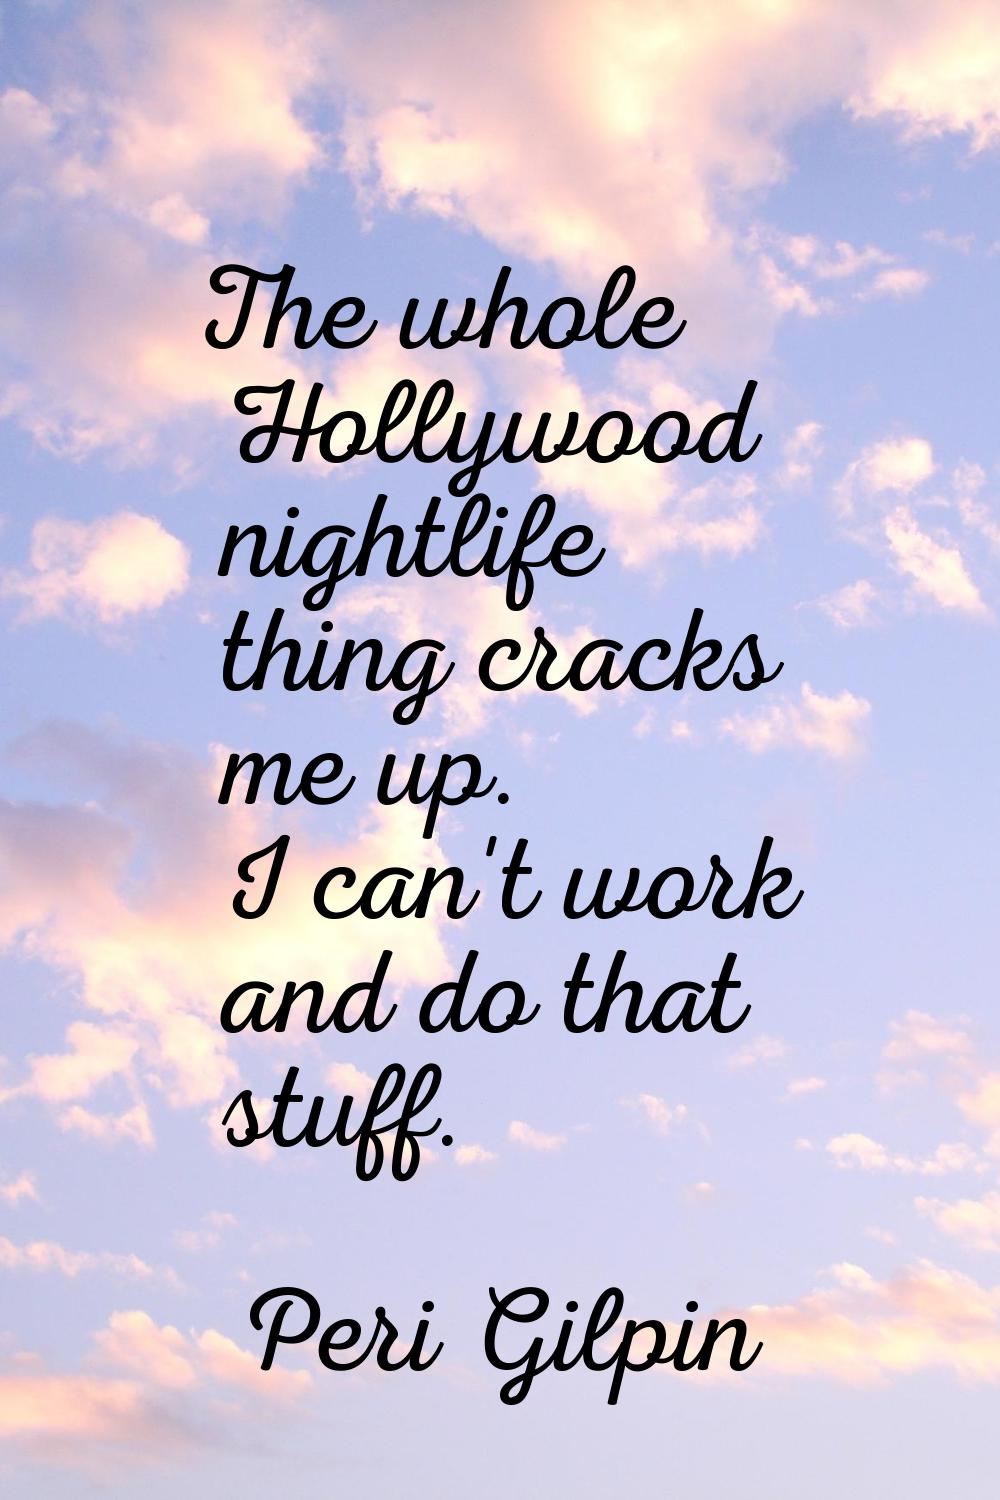 The whole Hollywood nightlife thing cracks me up. I can't work and do that stuff.